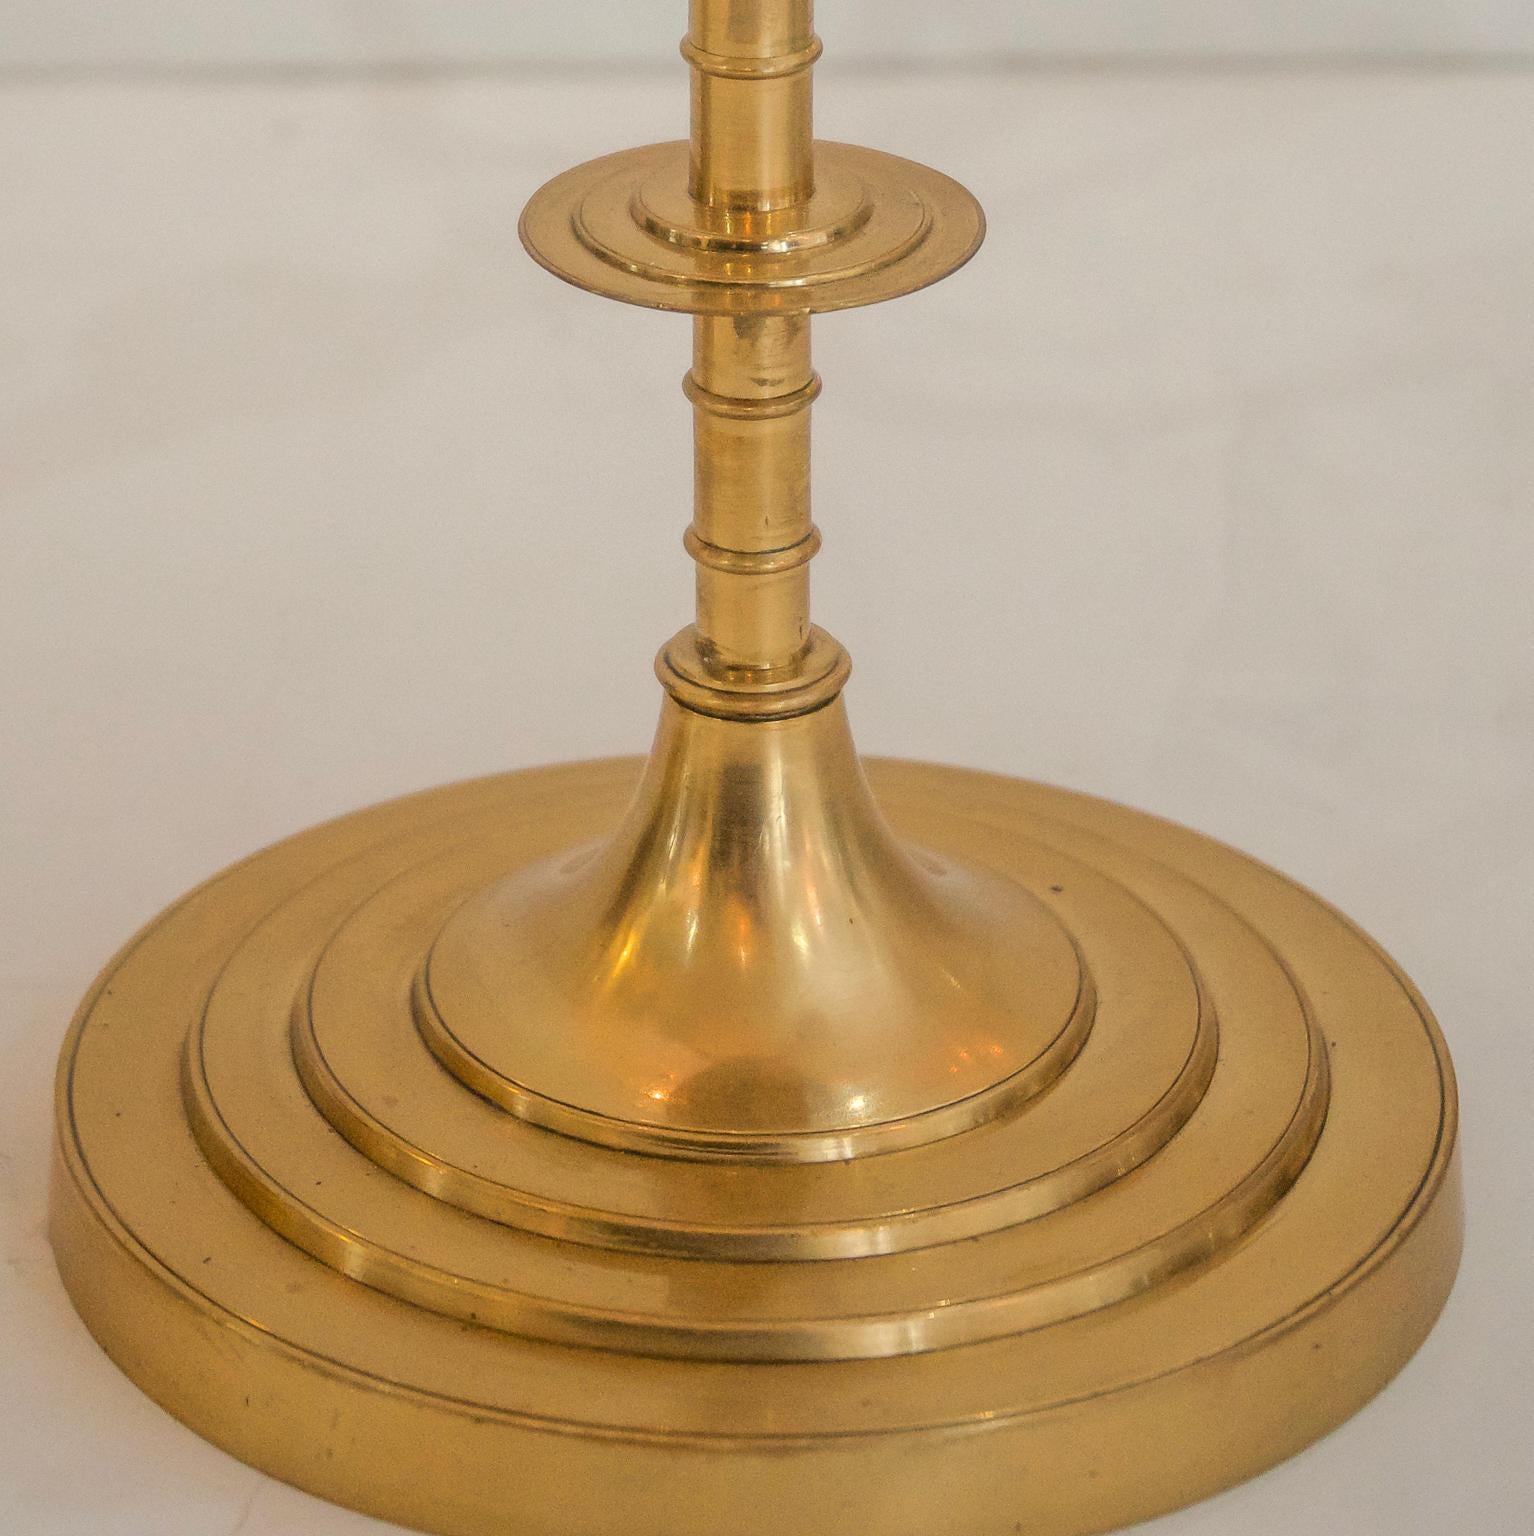 This stylish set of brass candelabrum date to the late 19th century and were acquired in London, England.